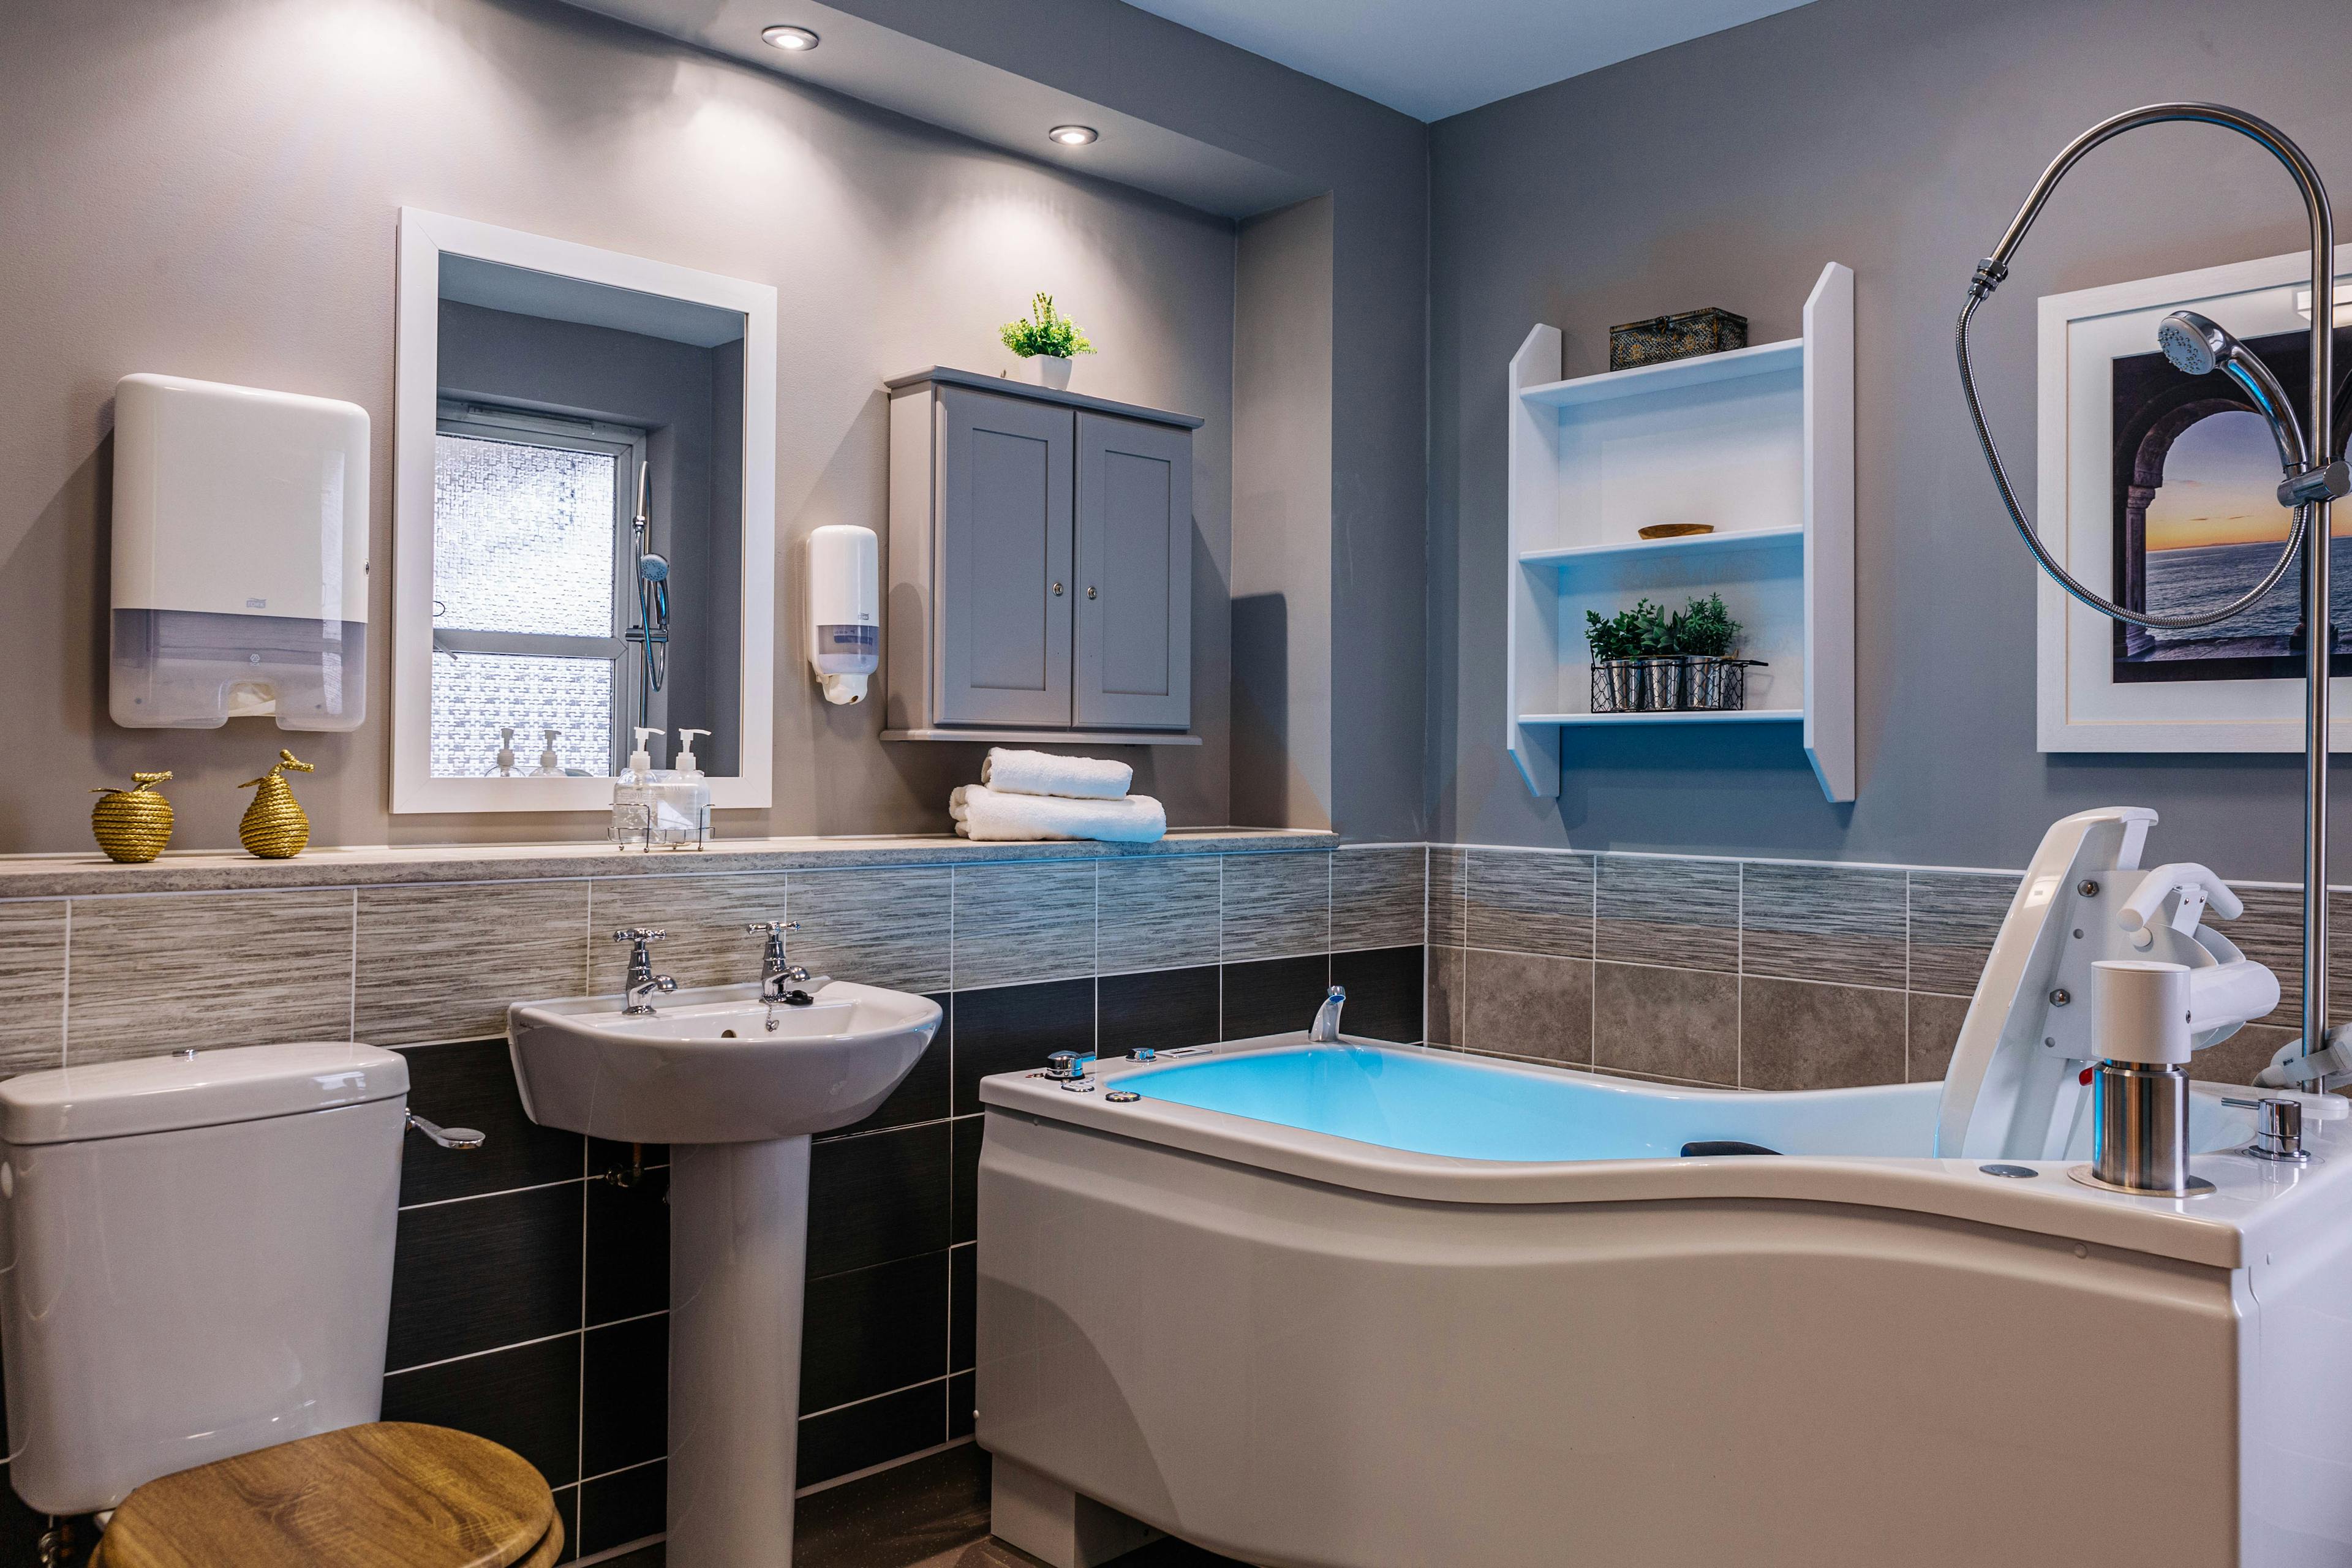 Spa Bathroom at Magnolia Court Care Home in London, England